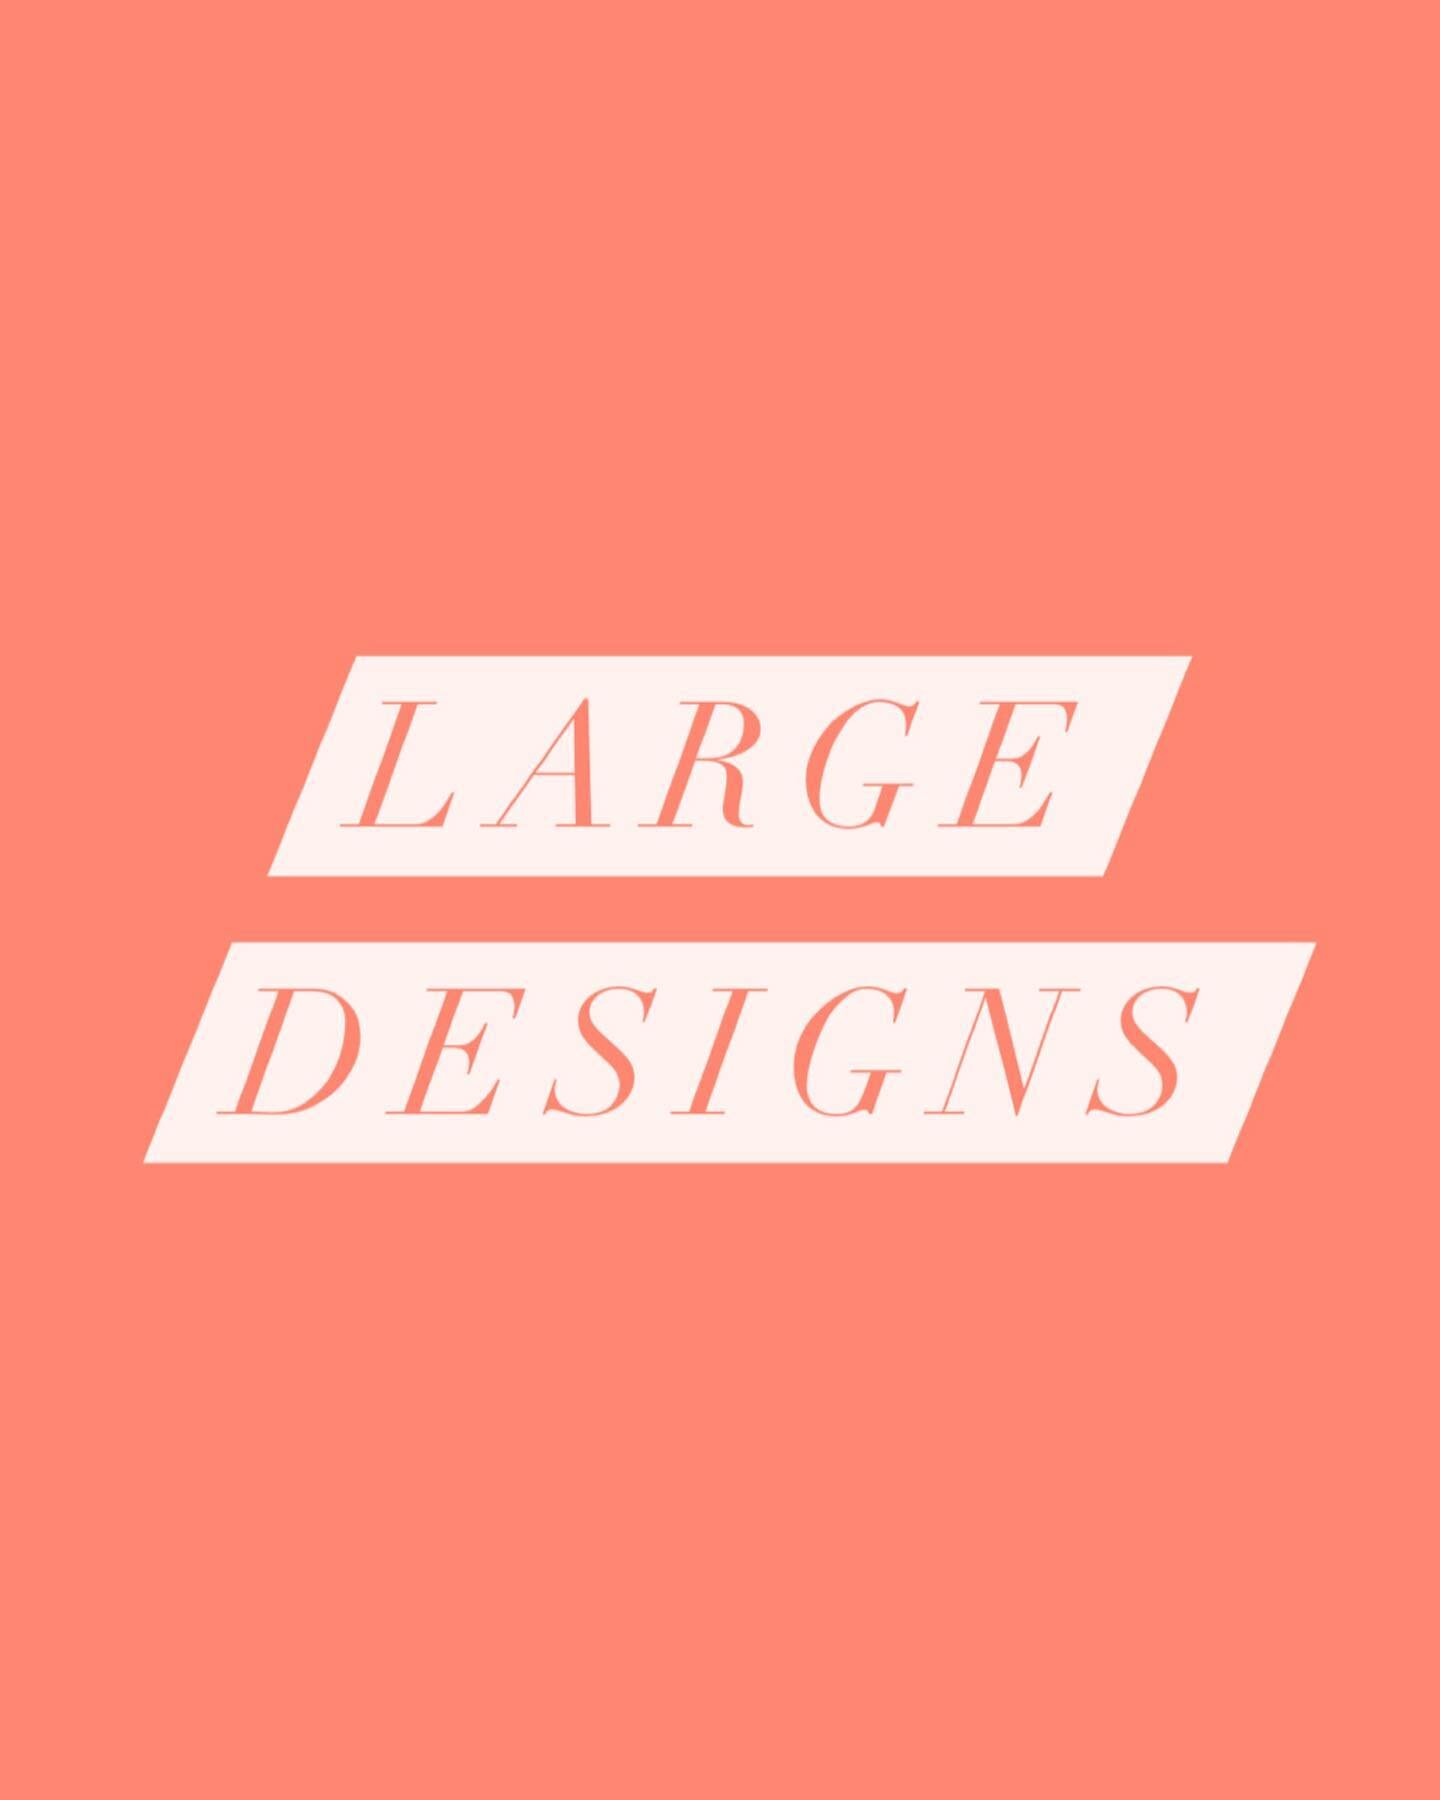 LARGE CONCEPTS AVAILABLE.
Please read before booking.

These designs are designed with specific large bodyparts in mind, but some of them can be redrawn to fit different parts. They can not be simplified and made smaller, they need large space for th